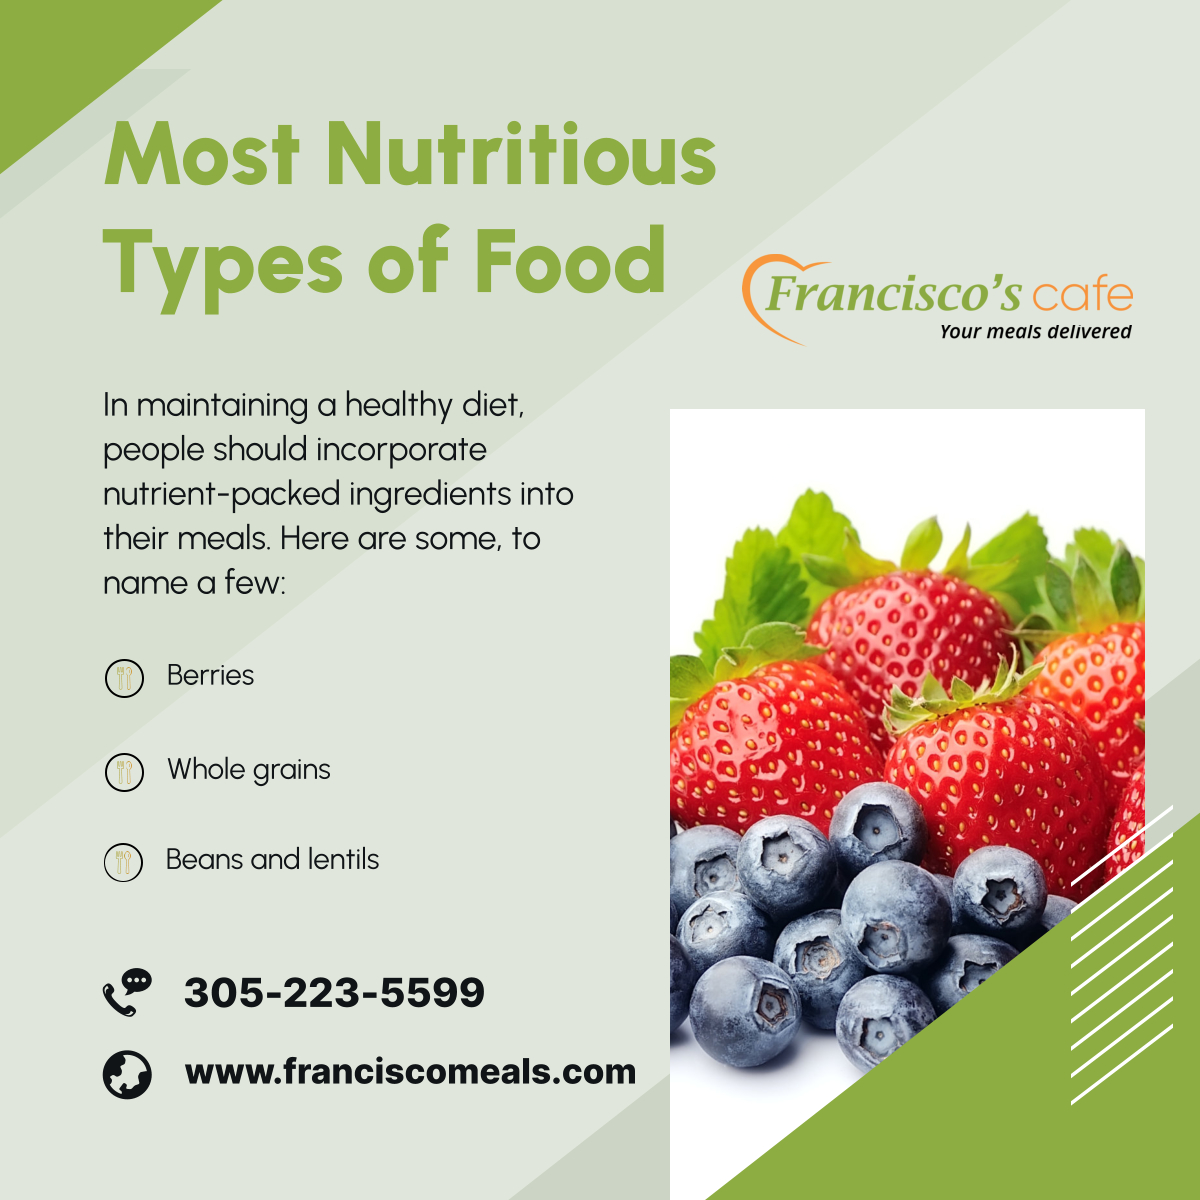 People should make it a point to use health-friendly ingredients in cooking meals. One must be creative in making nutritious recipes. Doing so makes it easier for them to maintain a healthy balanced diet.

#MiamiFL #Cafe #NutritiousRecipes